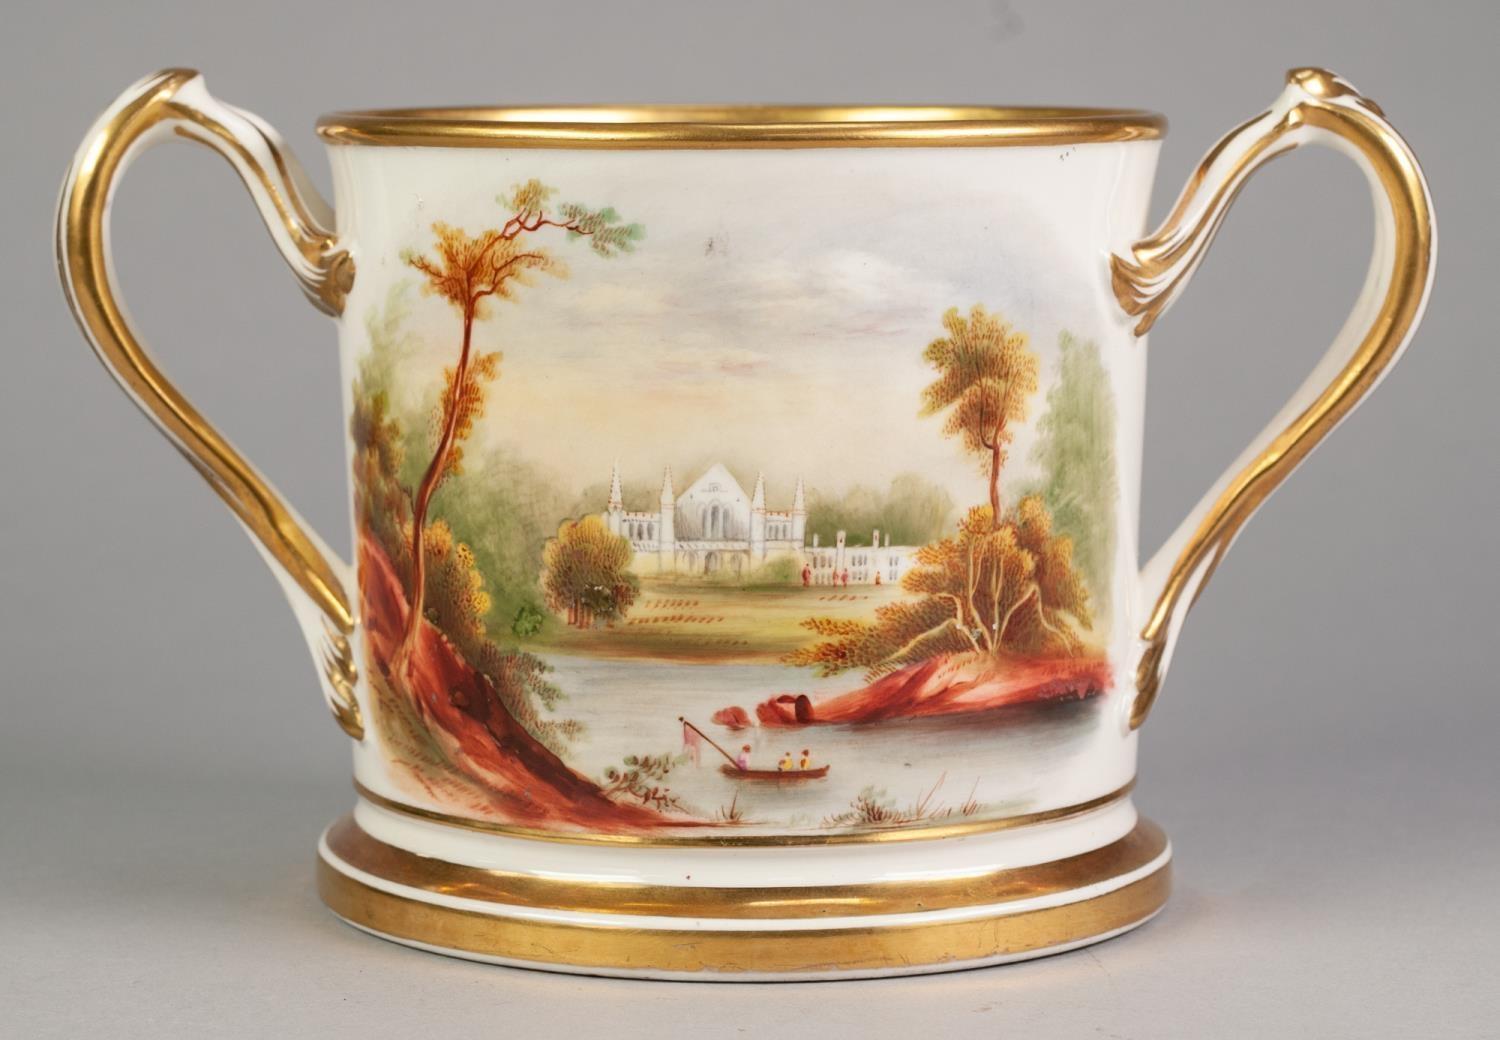 VICTORIAN PRESENTATION CHINA TWO HANDLED LARGE LOVING CUP, of typical form with entwined scroll